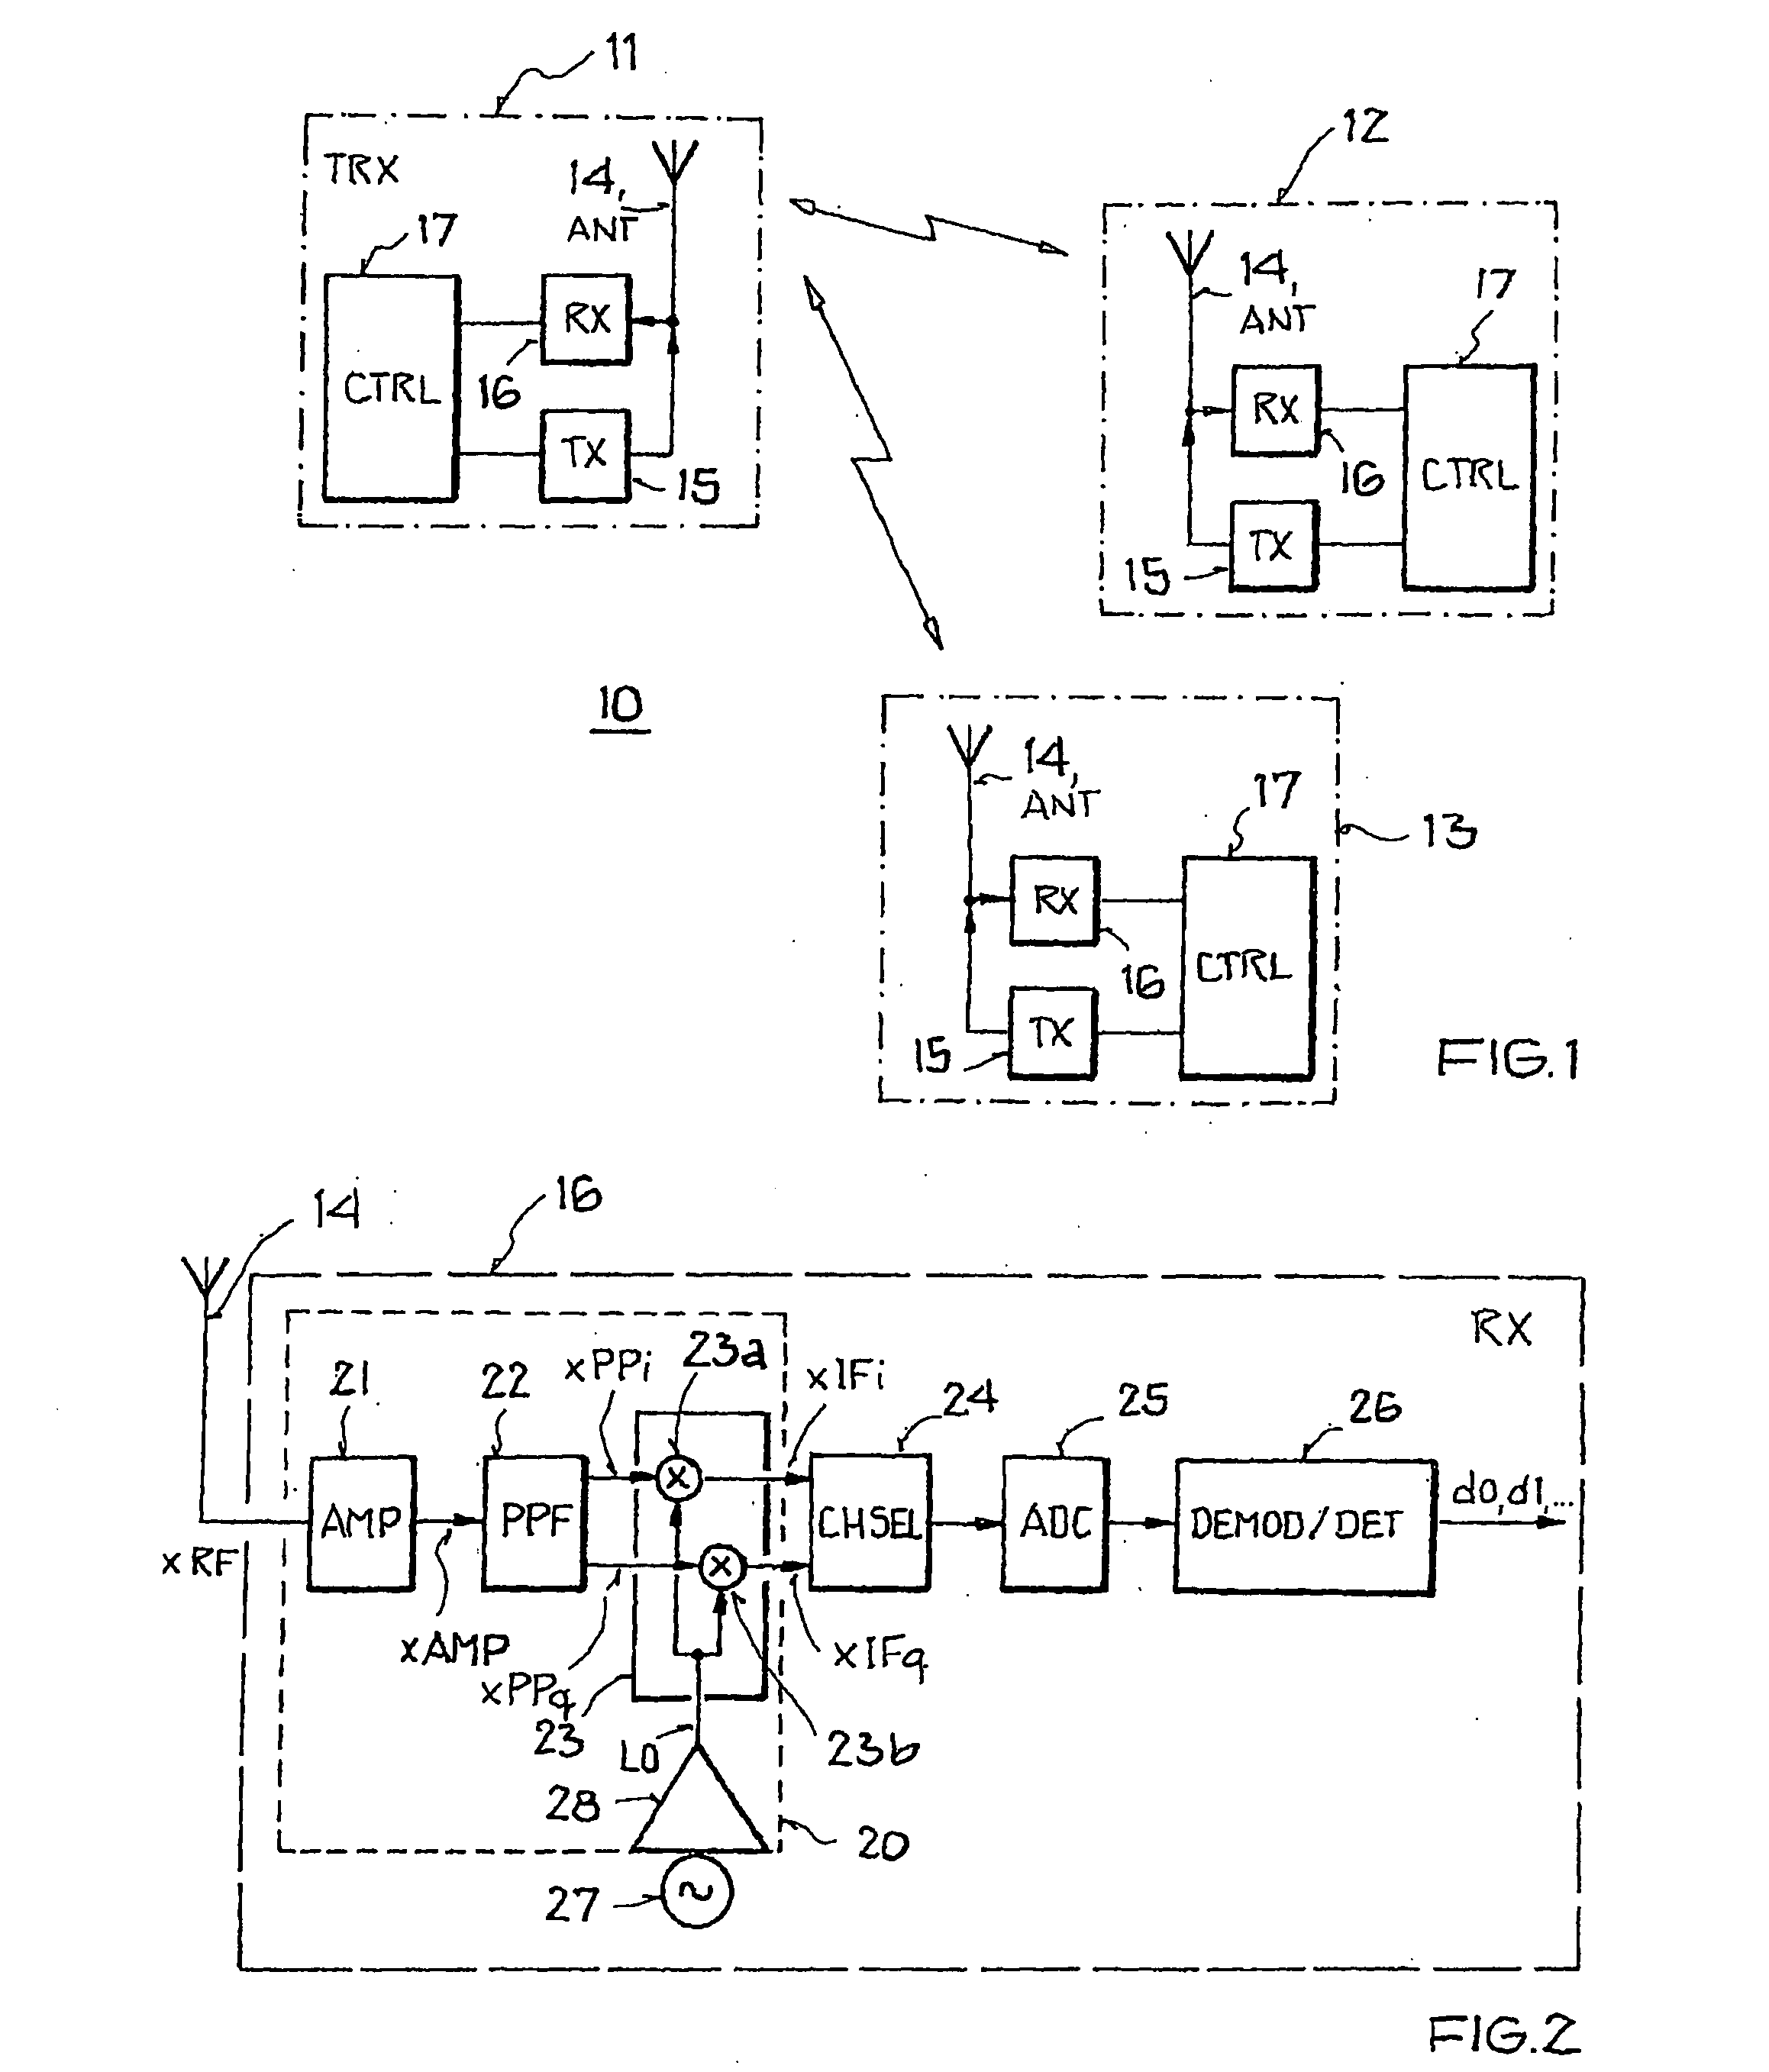 Integrated circuit arrangement for converting a high-frequency bandpass signal to a low-frequency quadrature signal